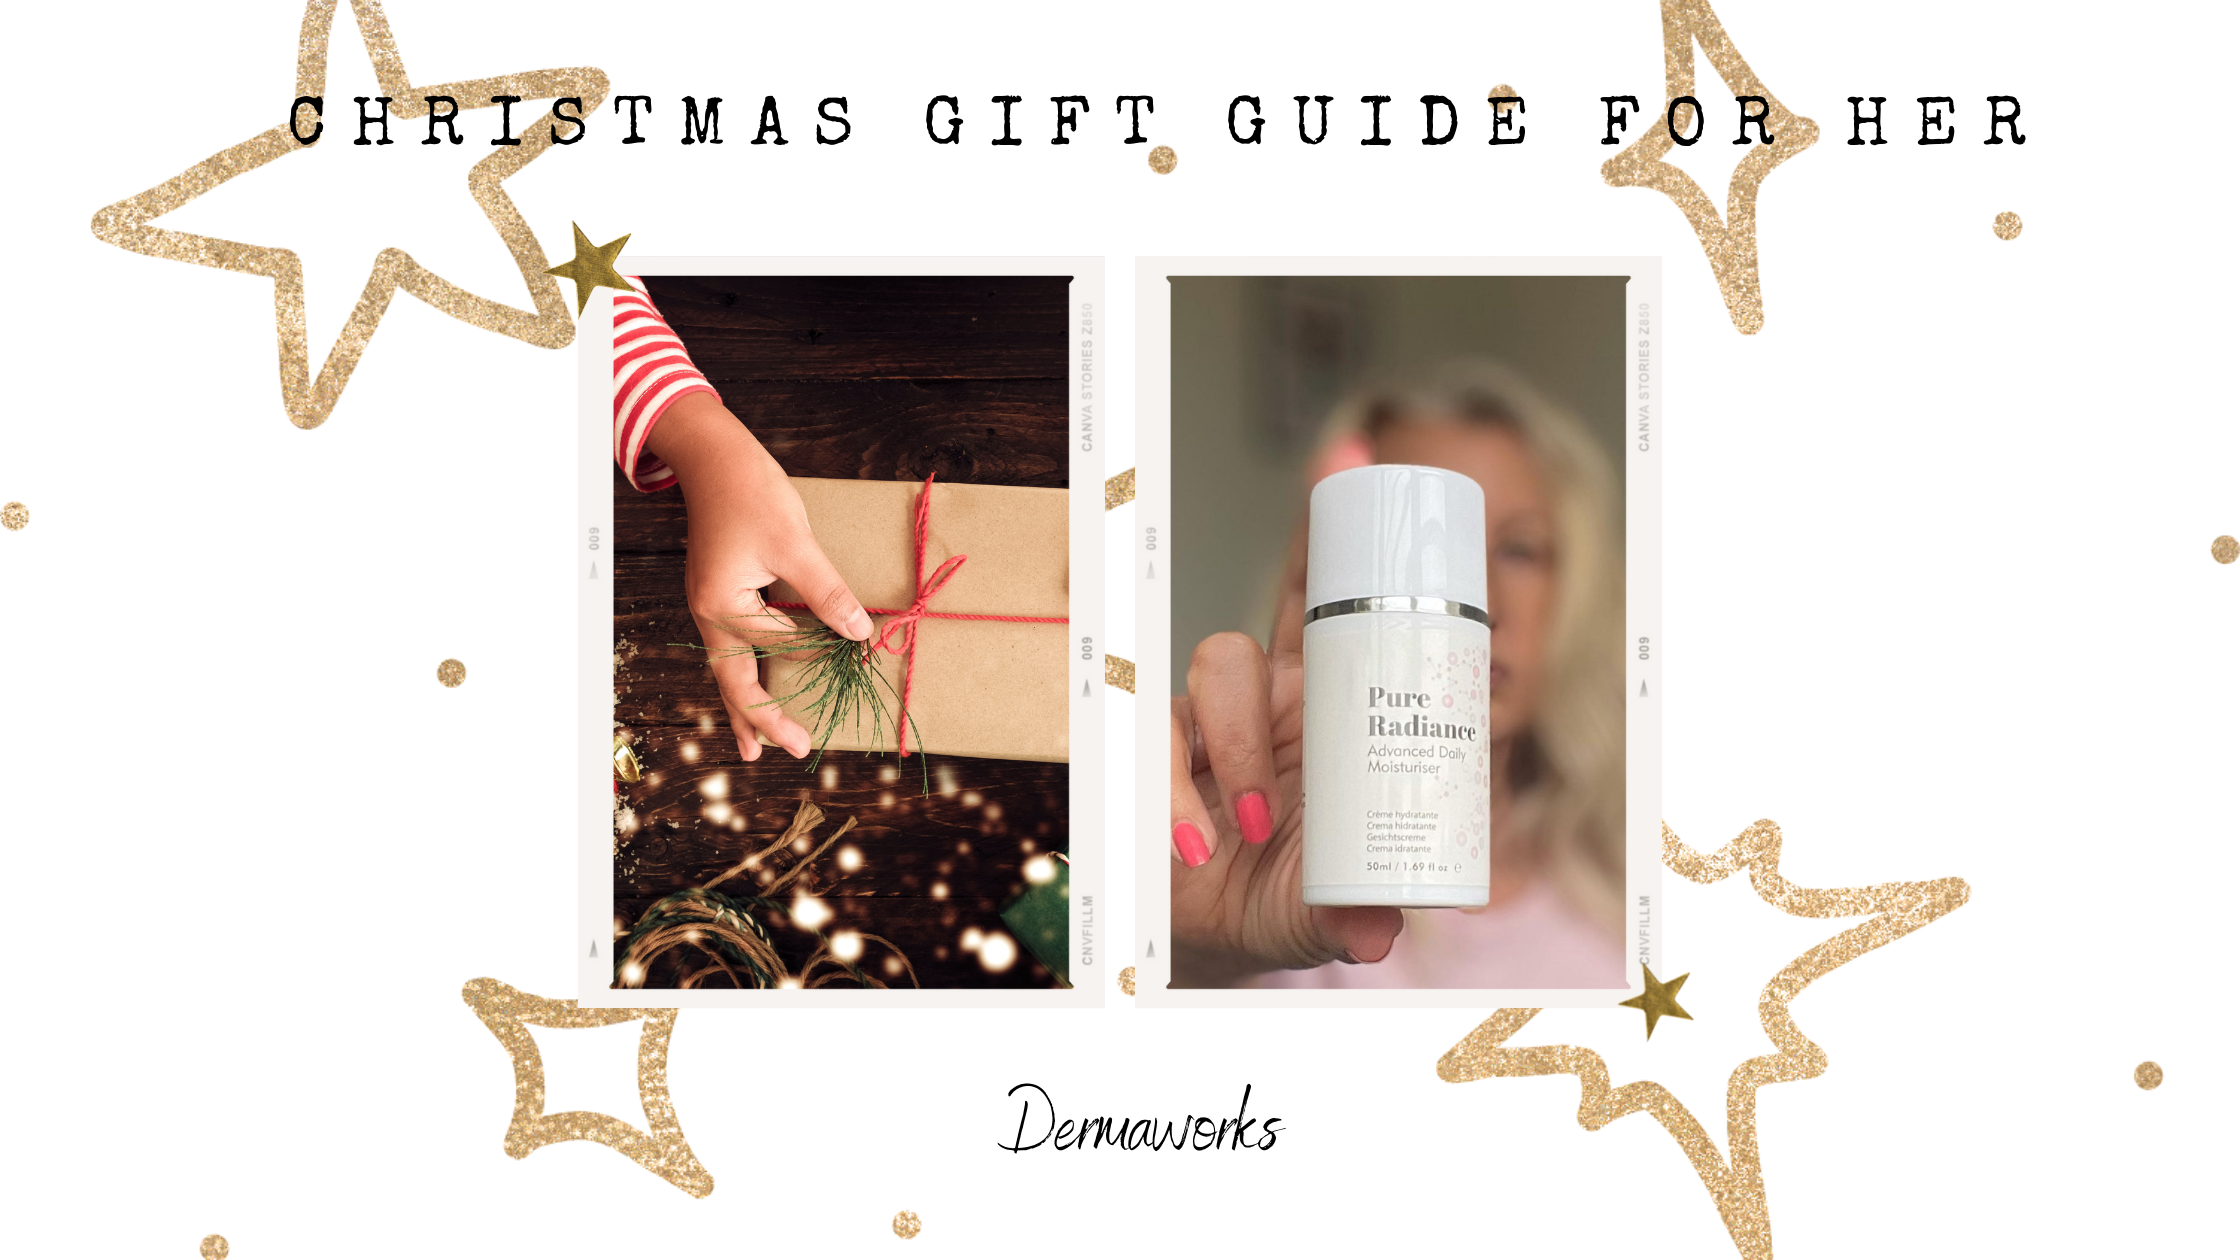 Christmas gift guide and ideas for her 